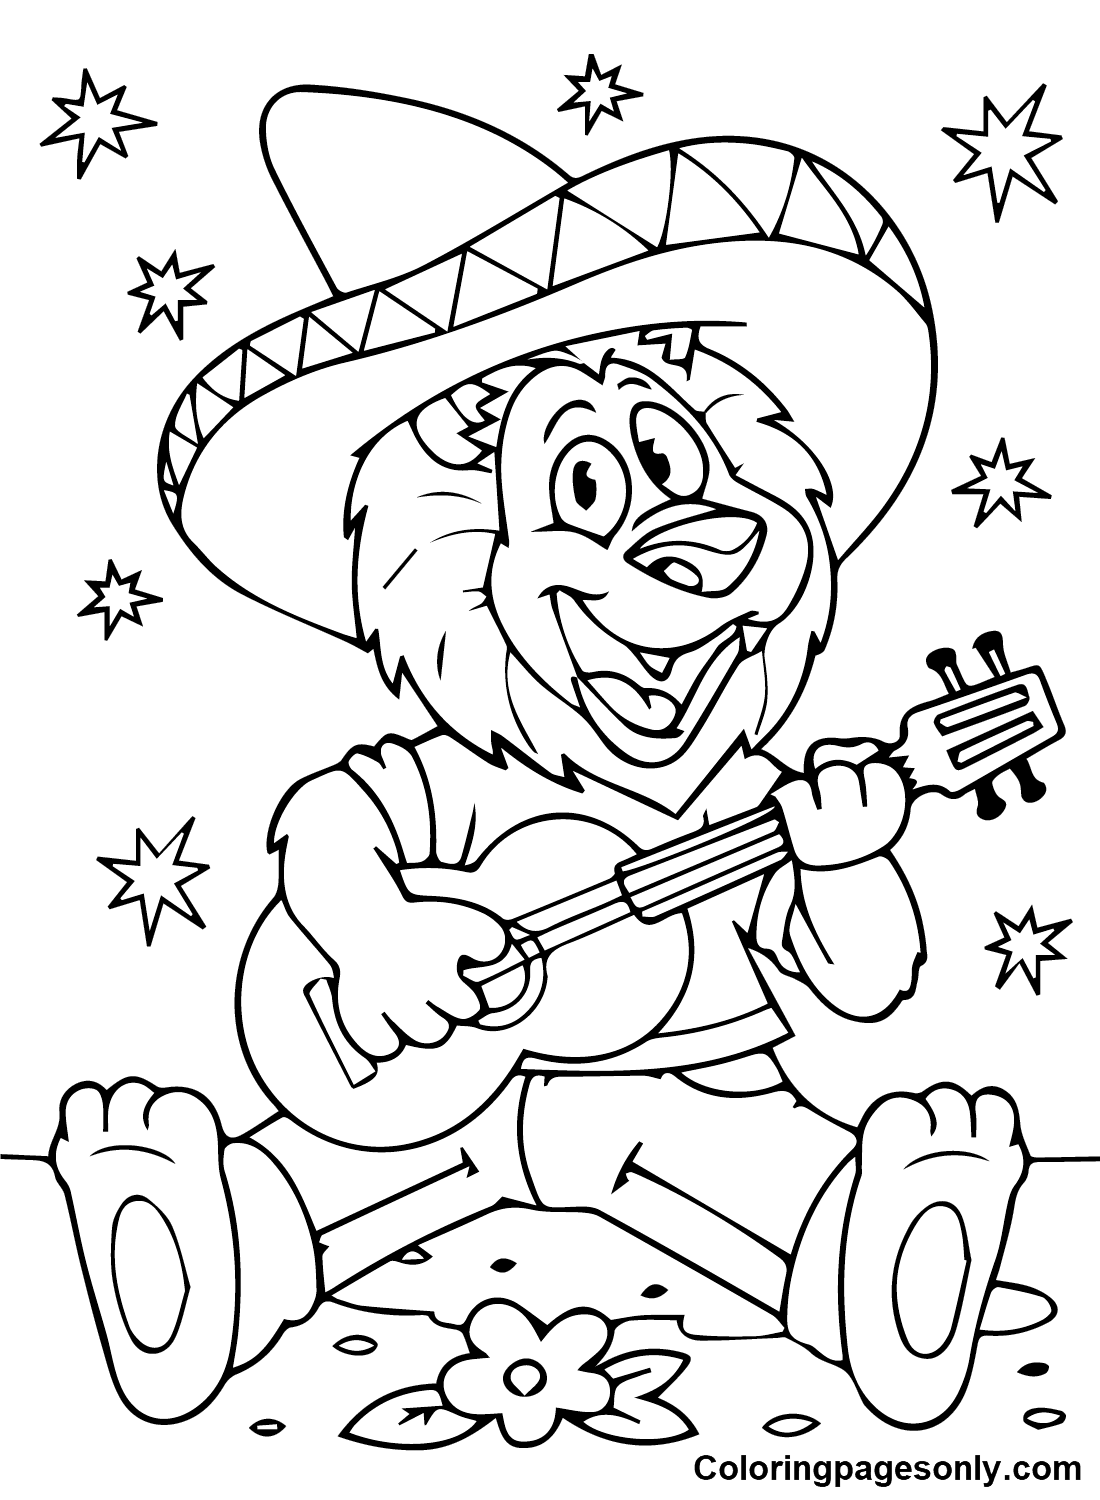 Lion with Guitar Coloring Page